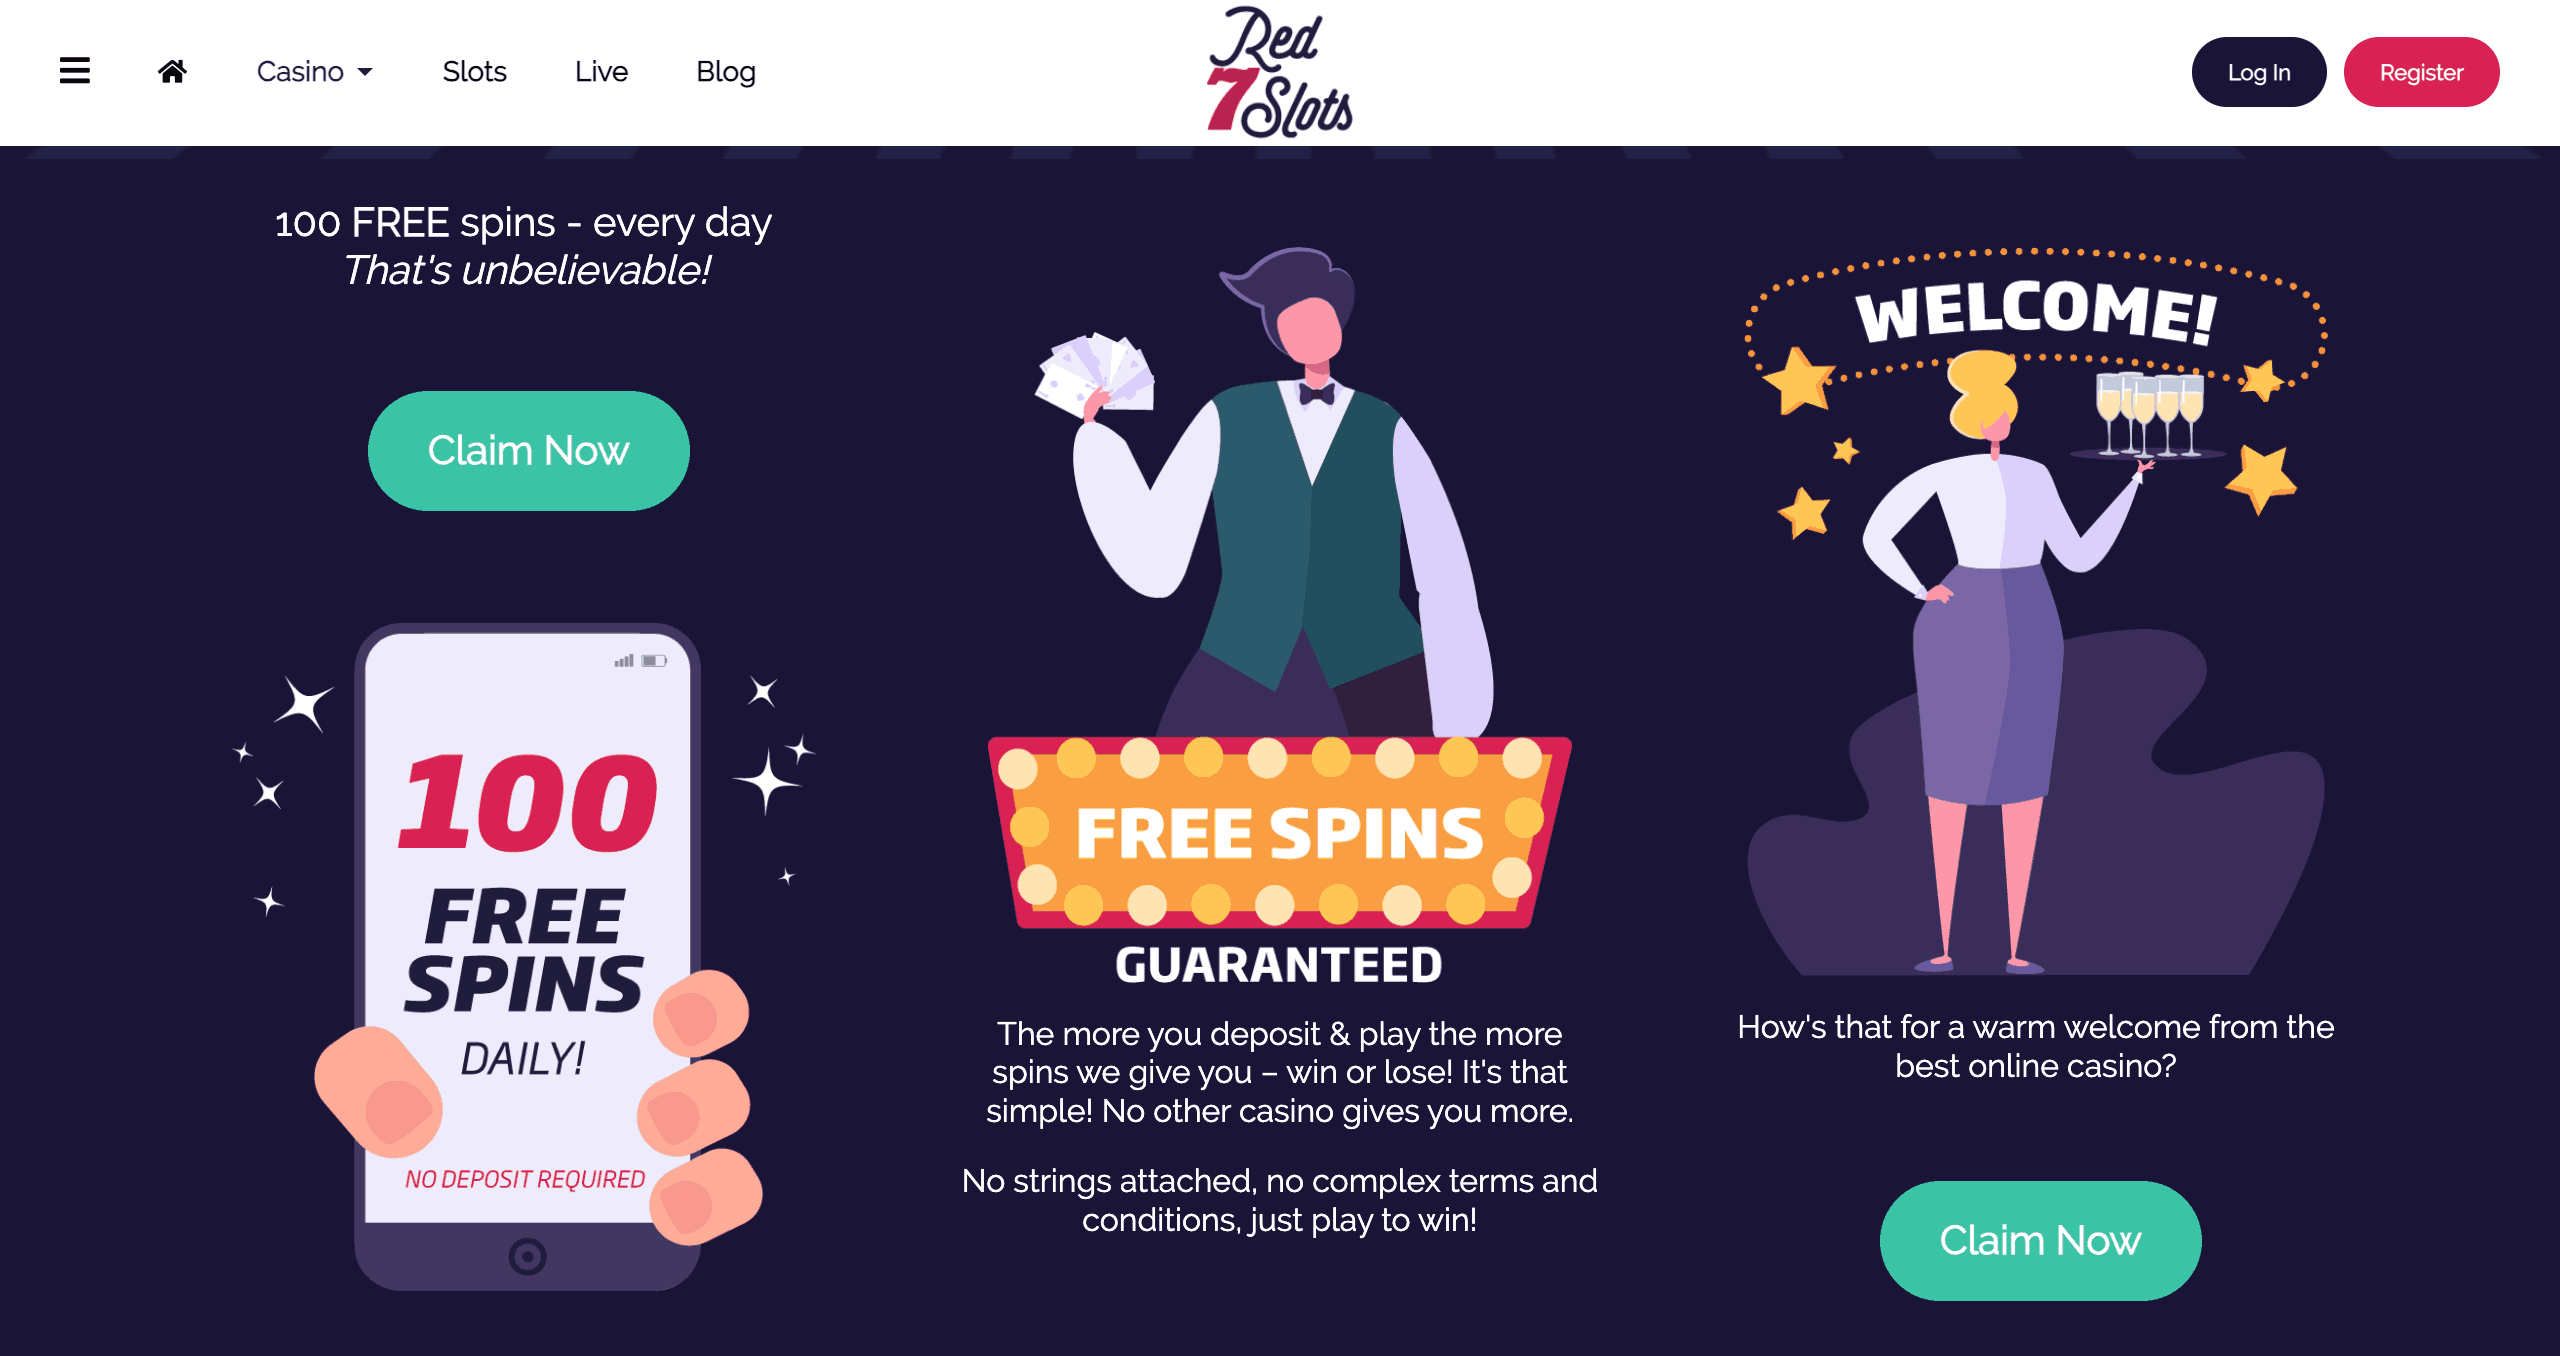 Red7Slots Casino Site - 3